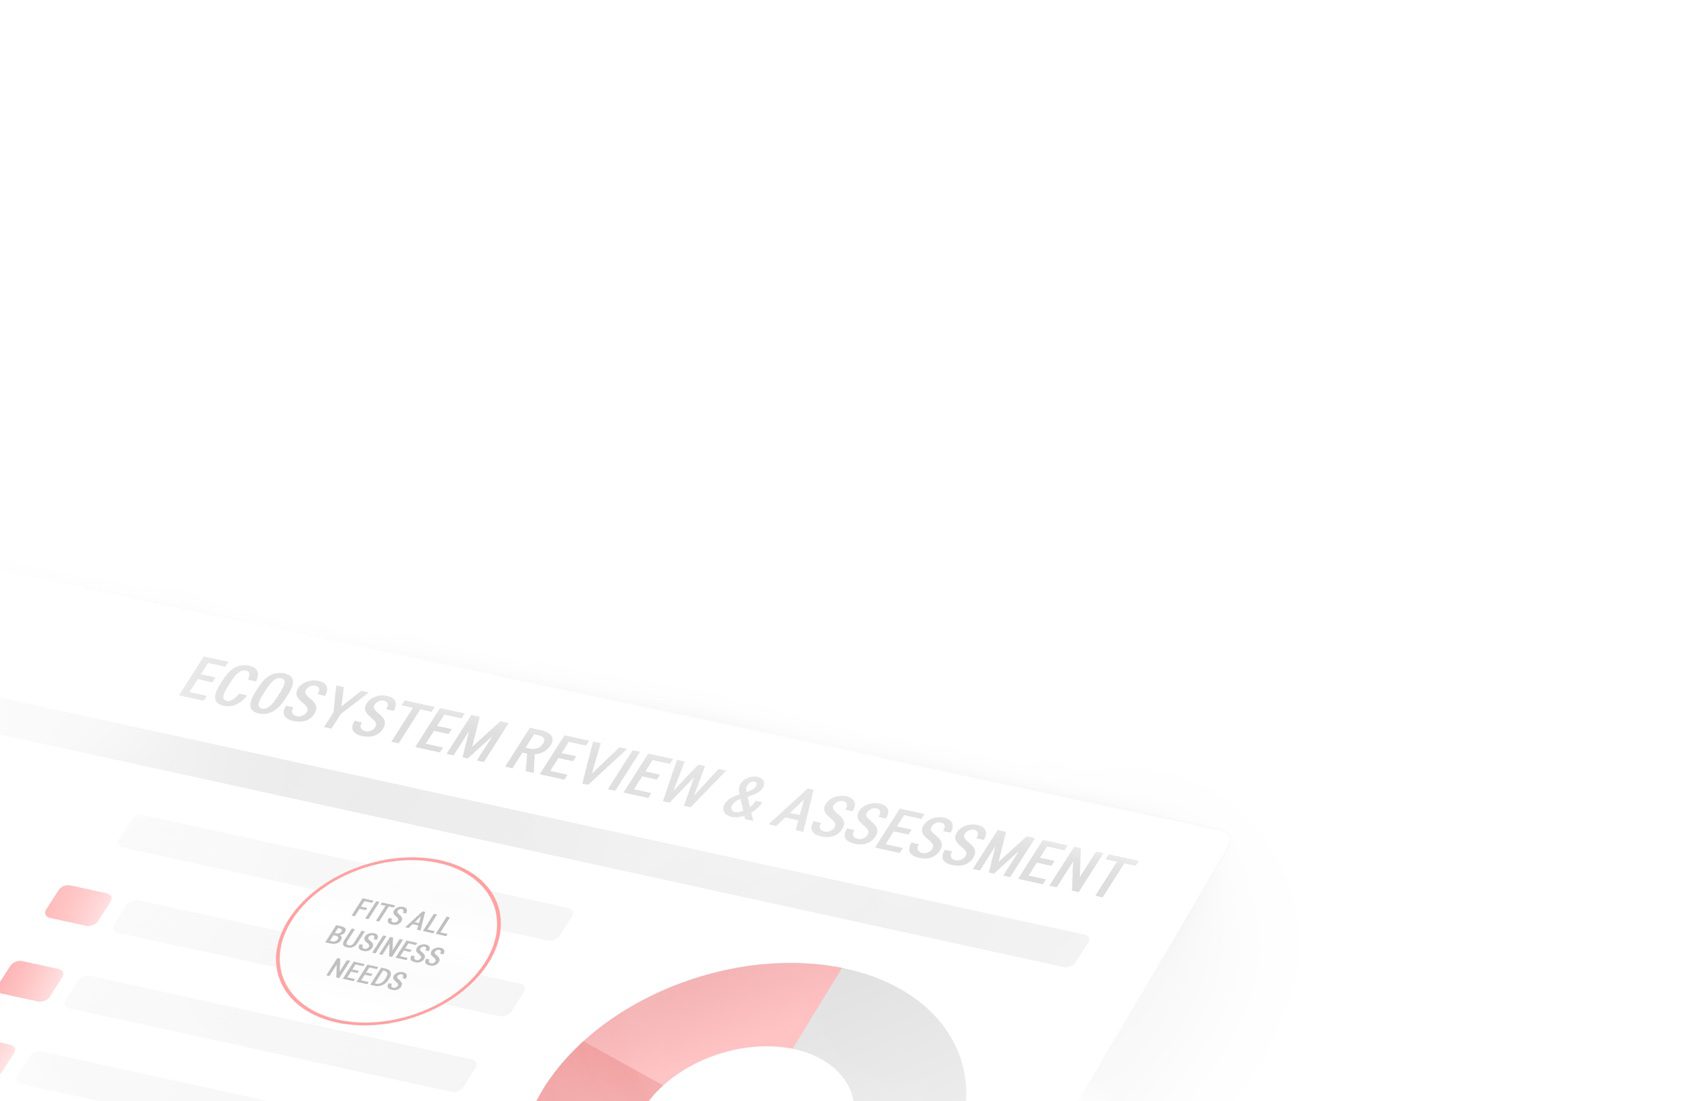 Aftermarket system review and assessment